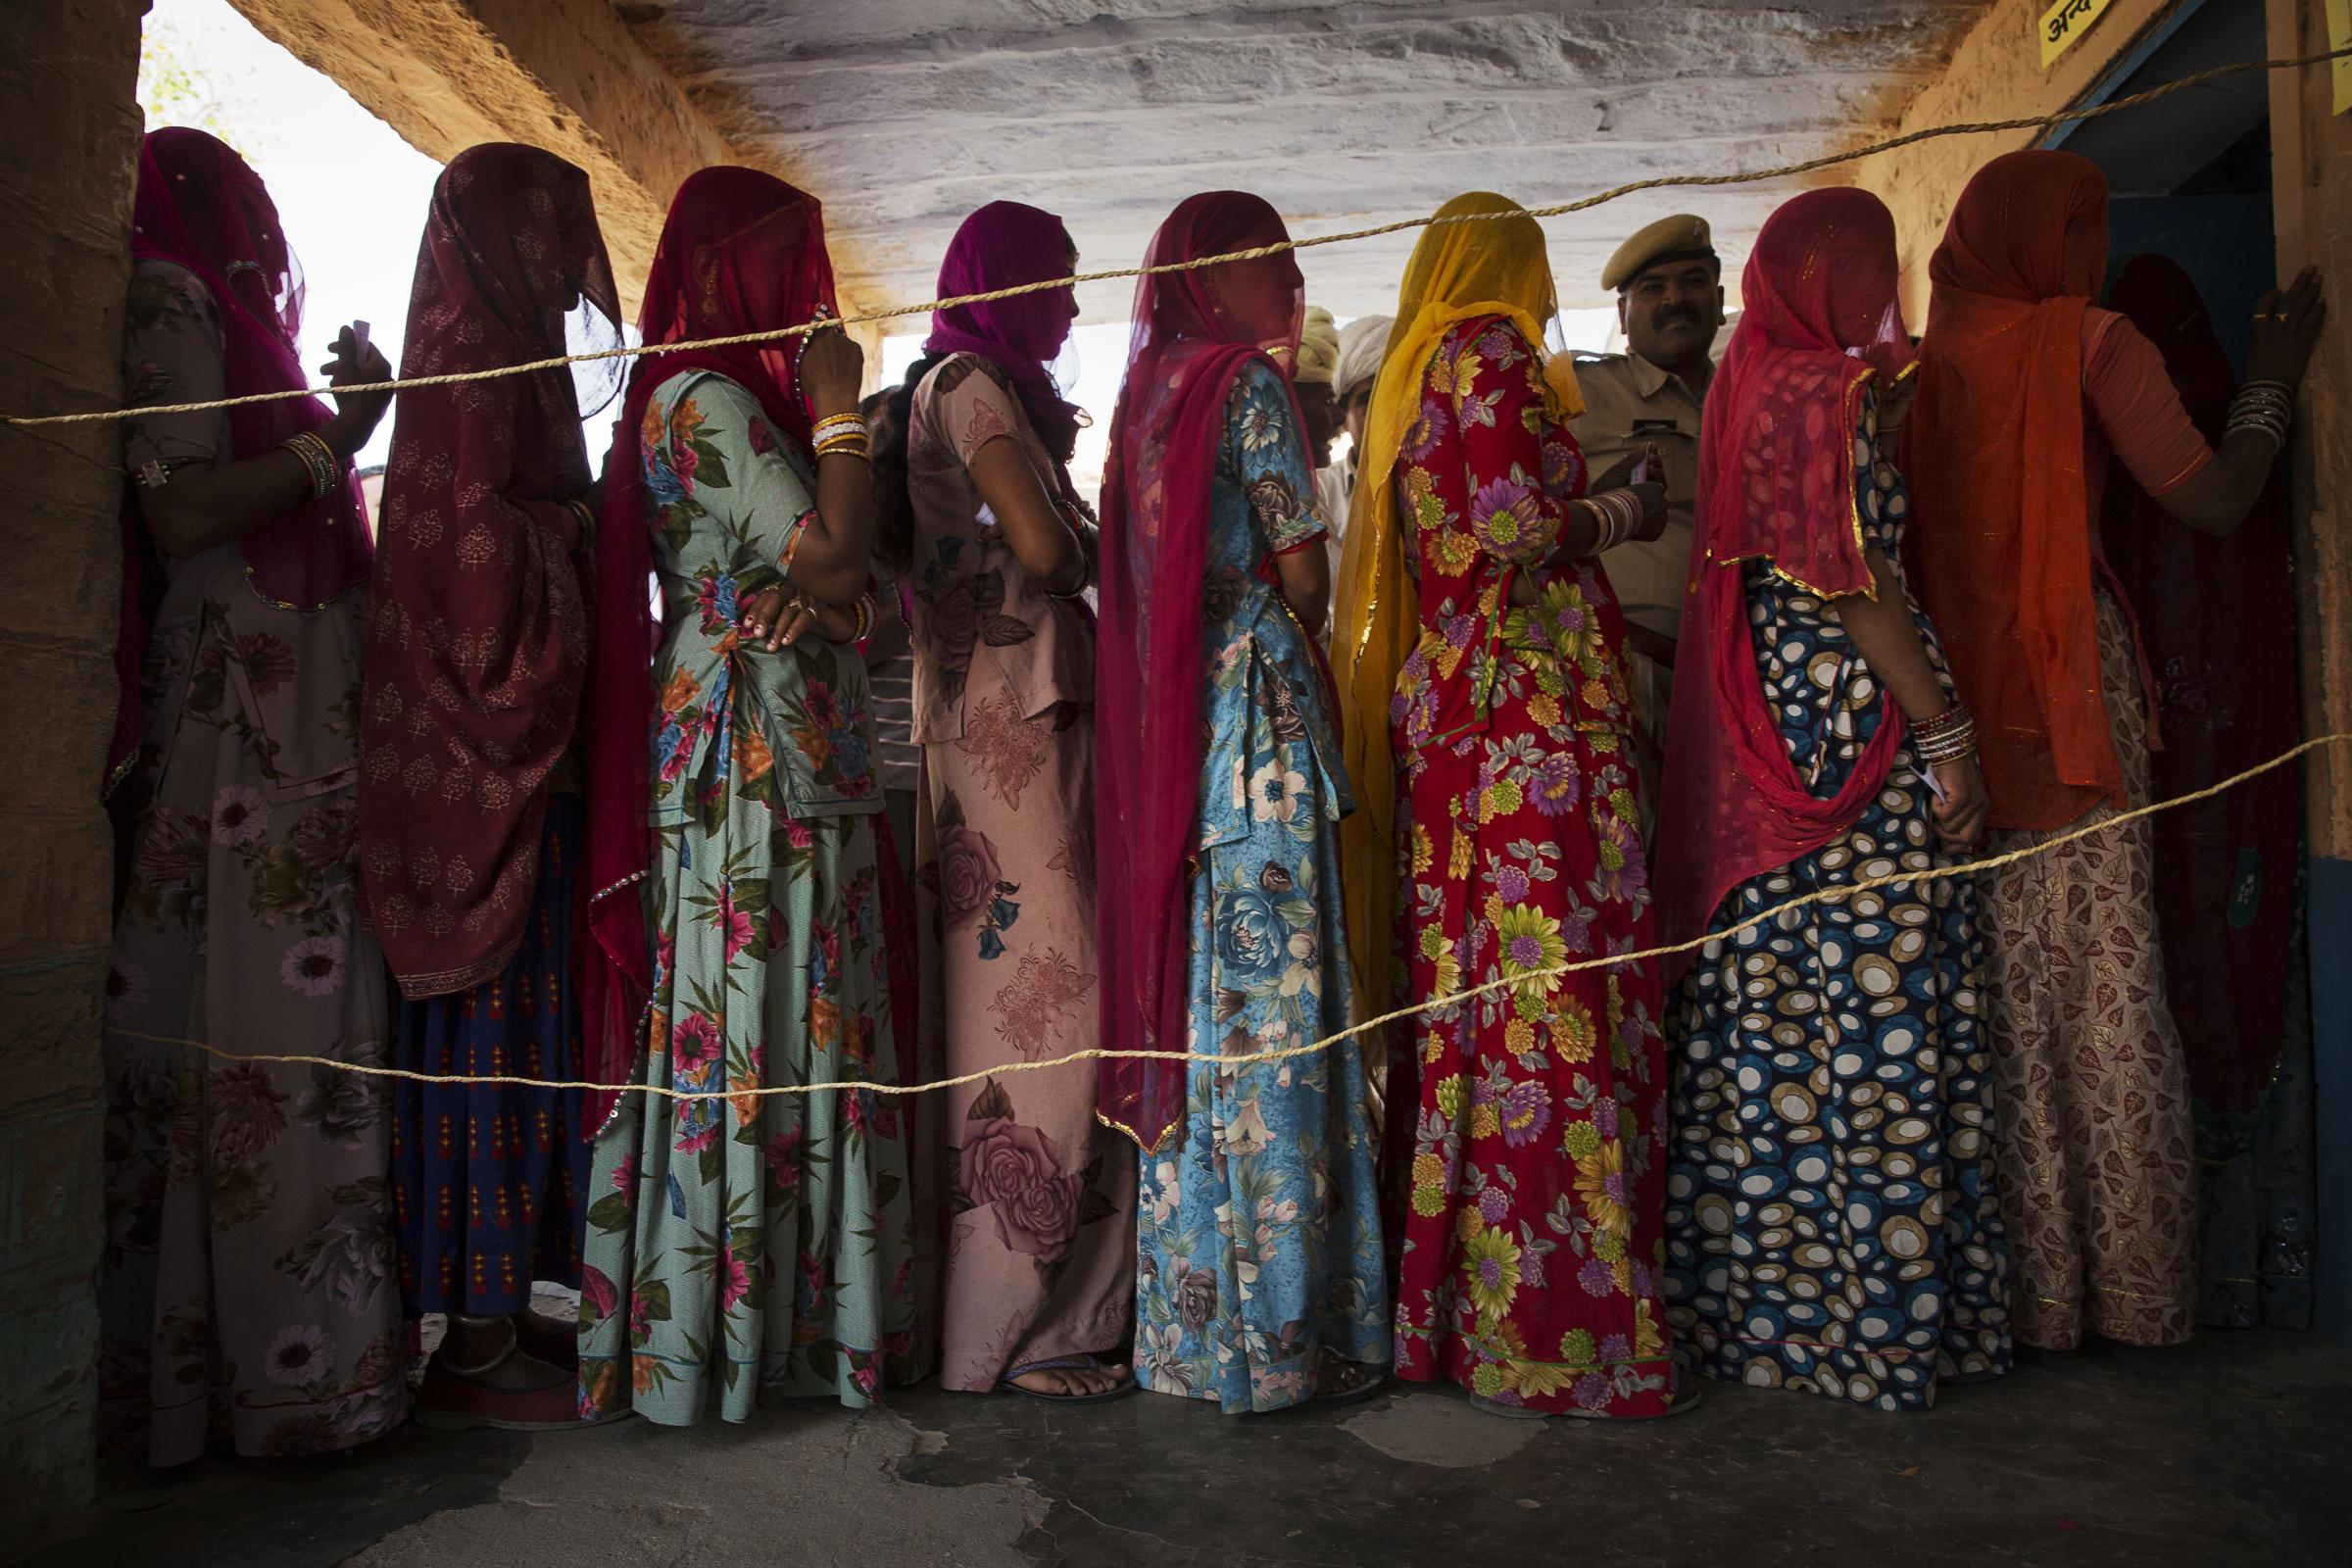 Indian women wait to vote at a polling station on April 17, 2014 in the Jodhpur District in the desert state of Rajasthan.